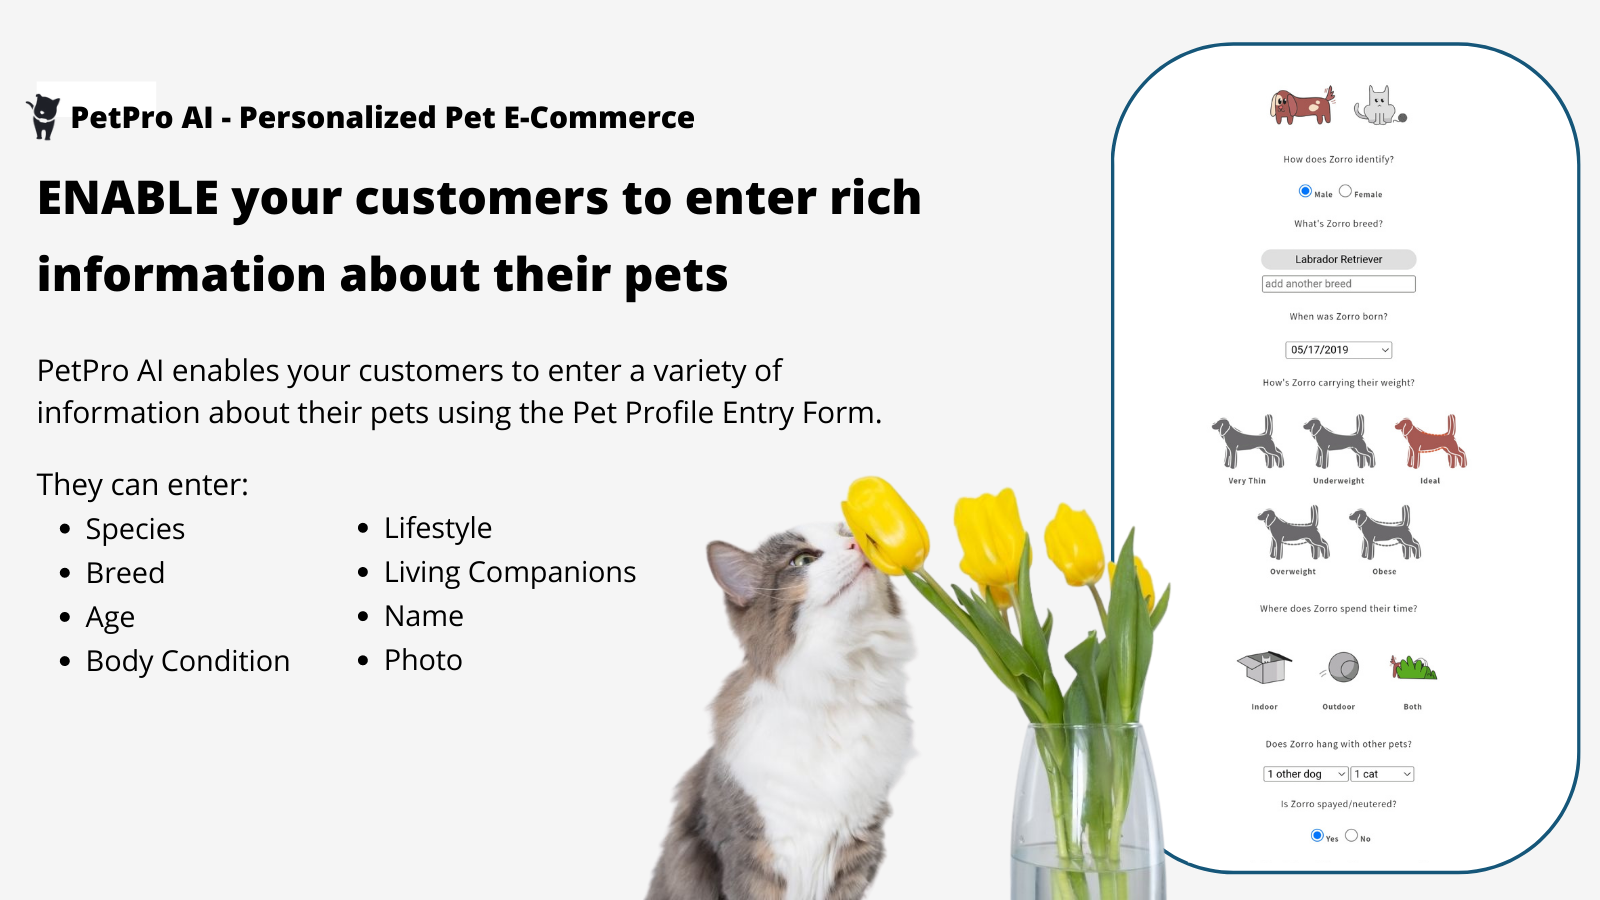 Enable your customers to enter rich information about their pets